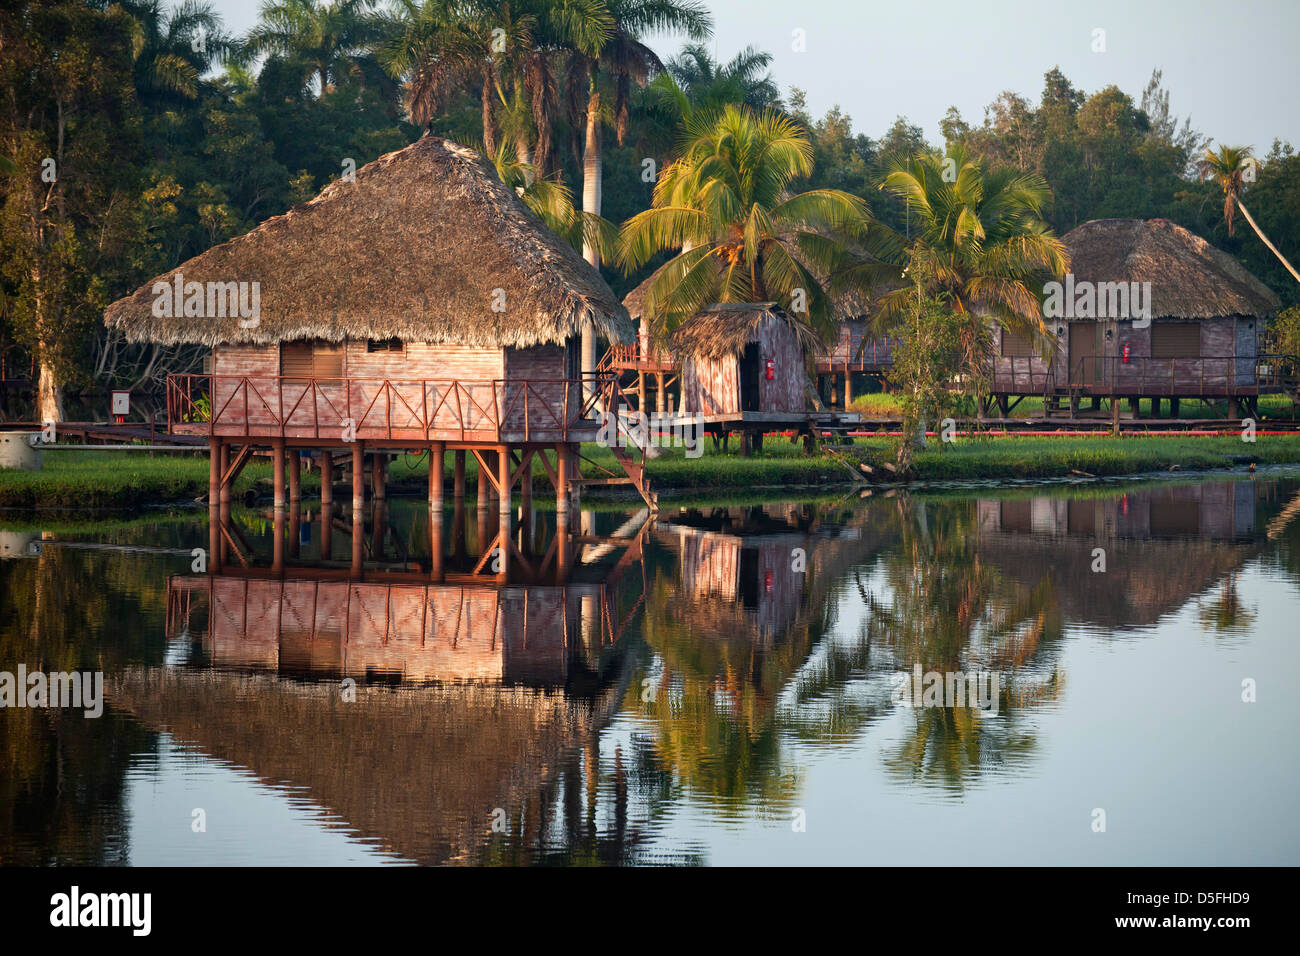 morning mood at Villa Guama, small Hotel designed to resemble an Indian Village on stilts in the water near Boca de Guama, Stock Photo